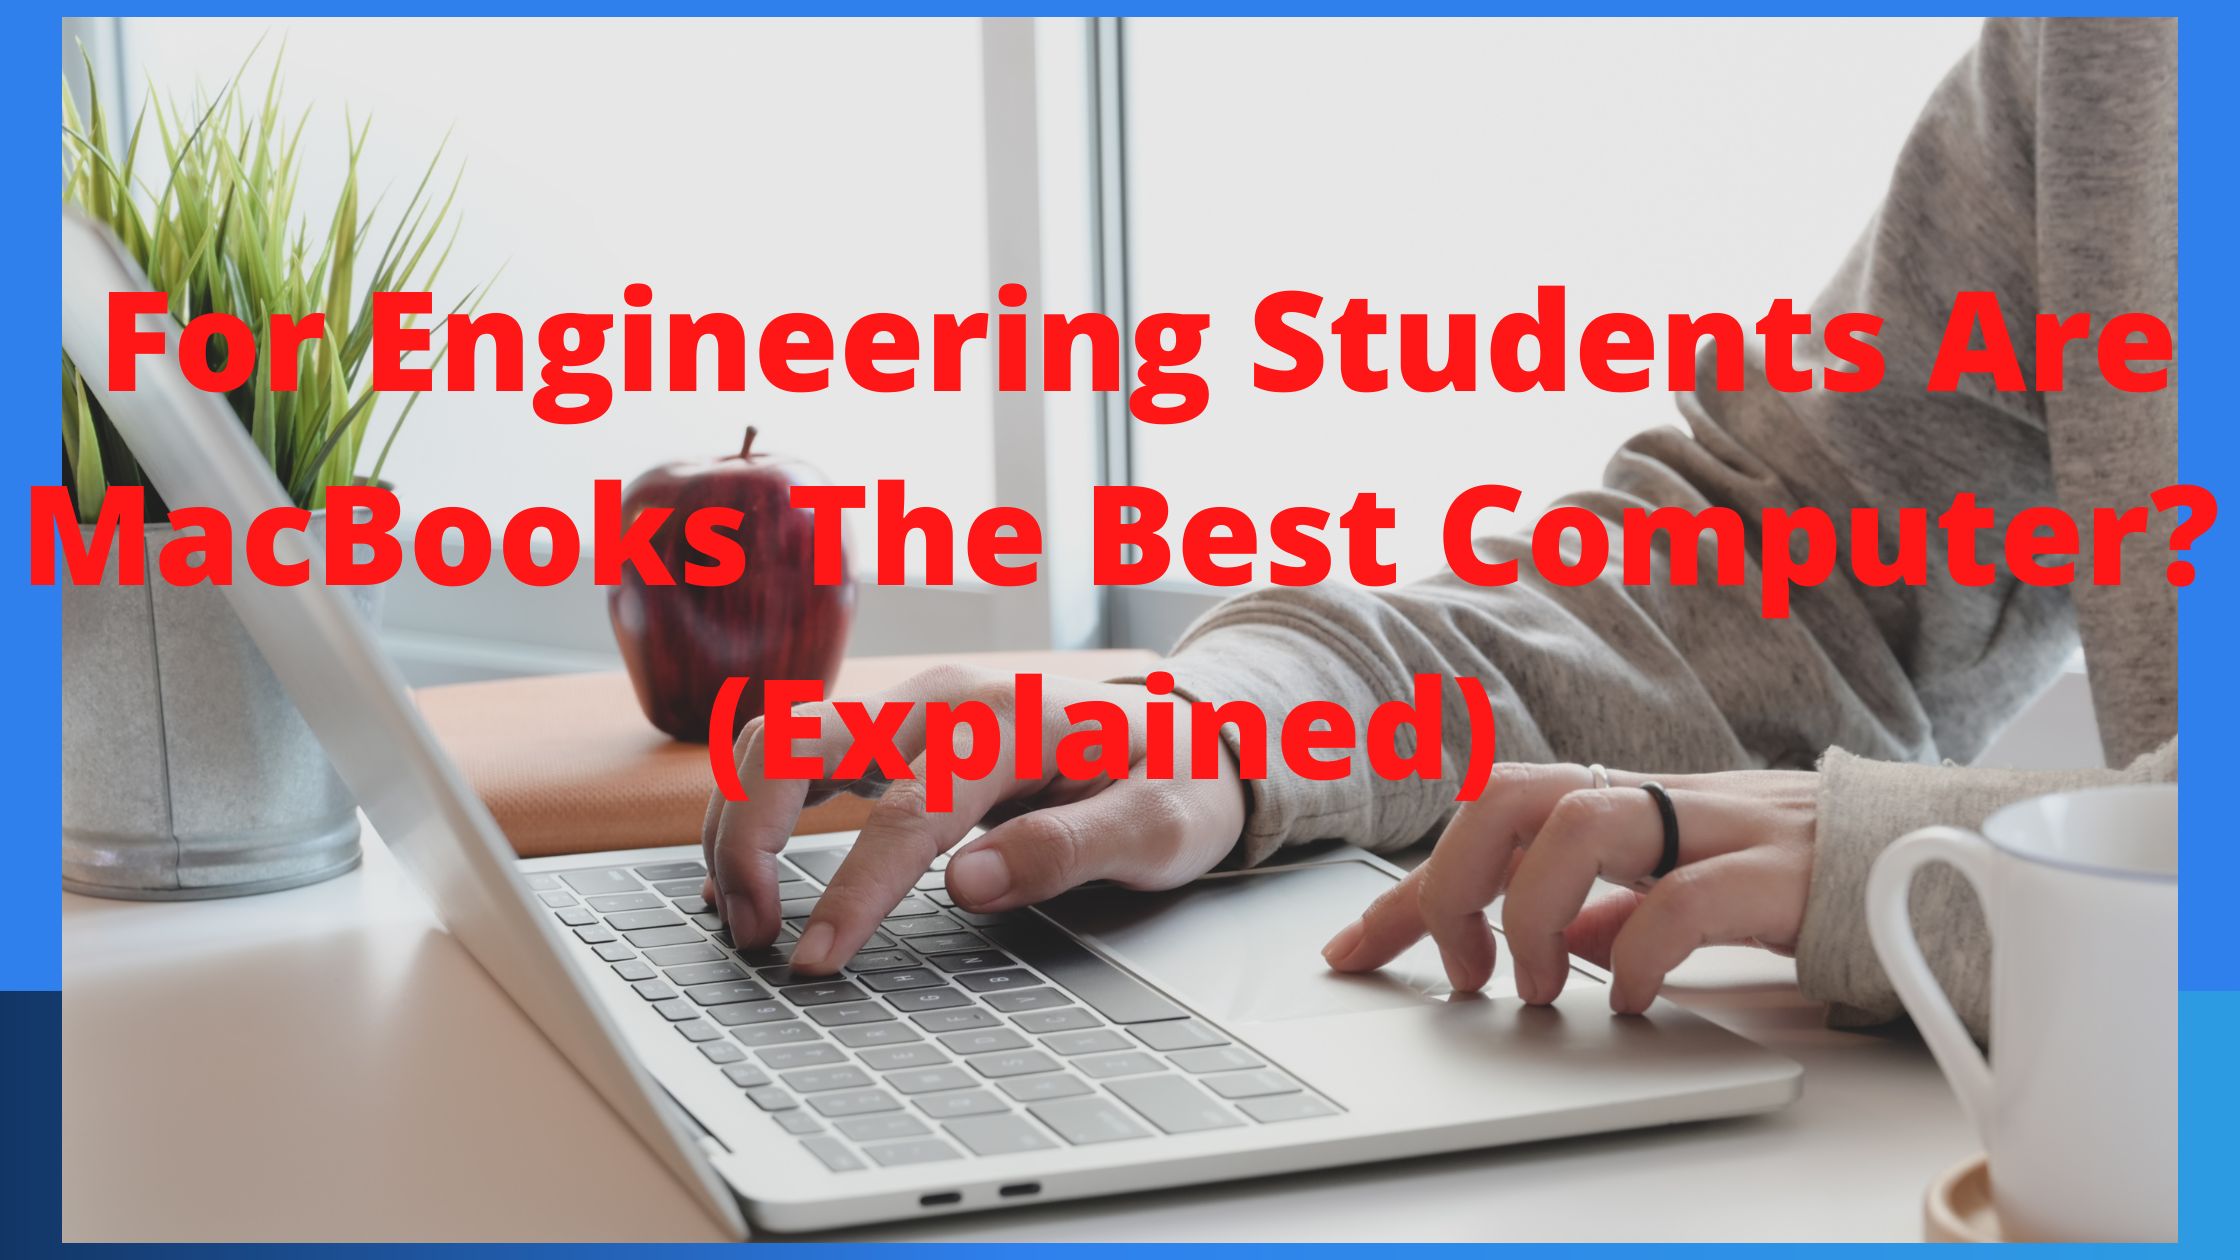 For Engineering Students Are MacBooks The Best Computer? (Explained)